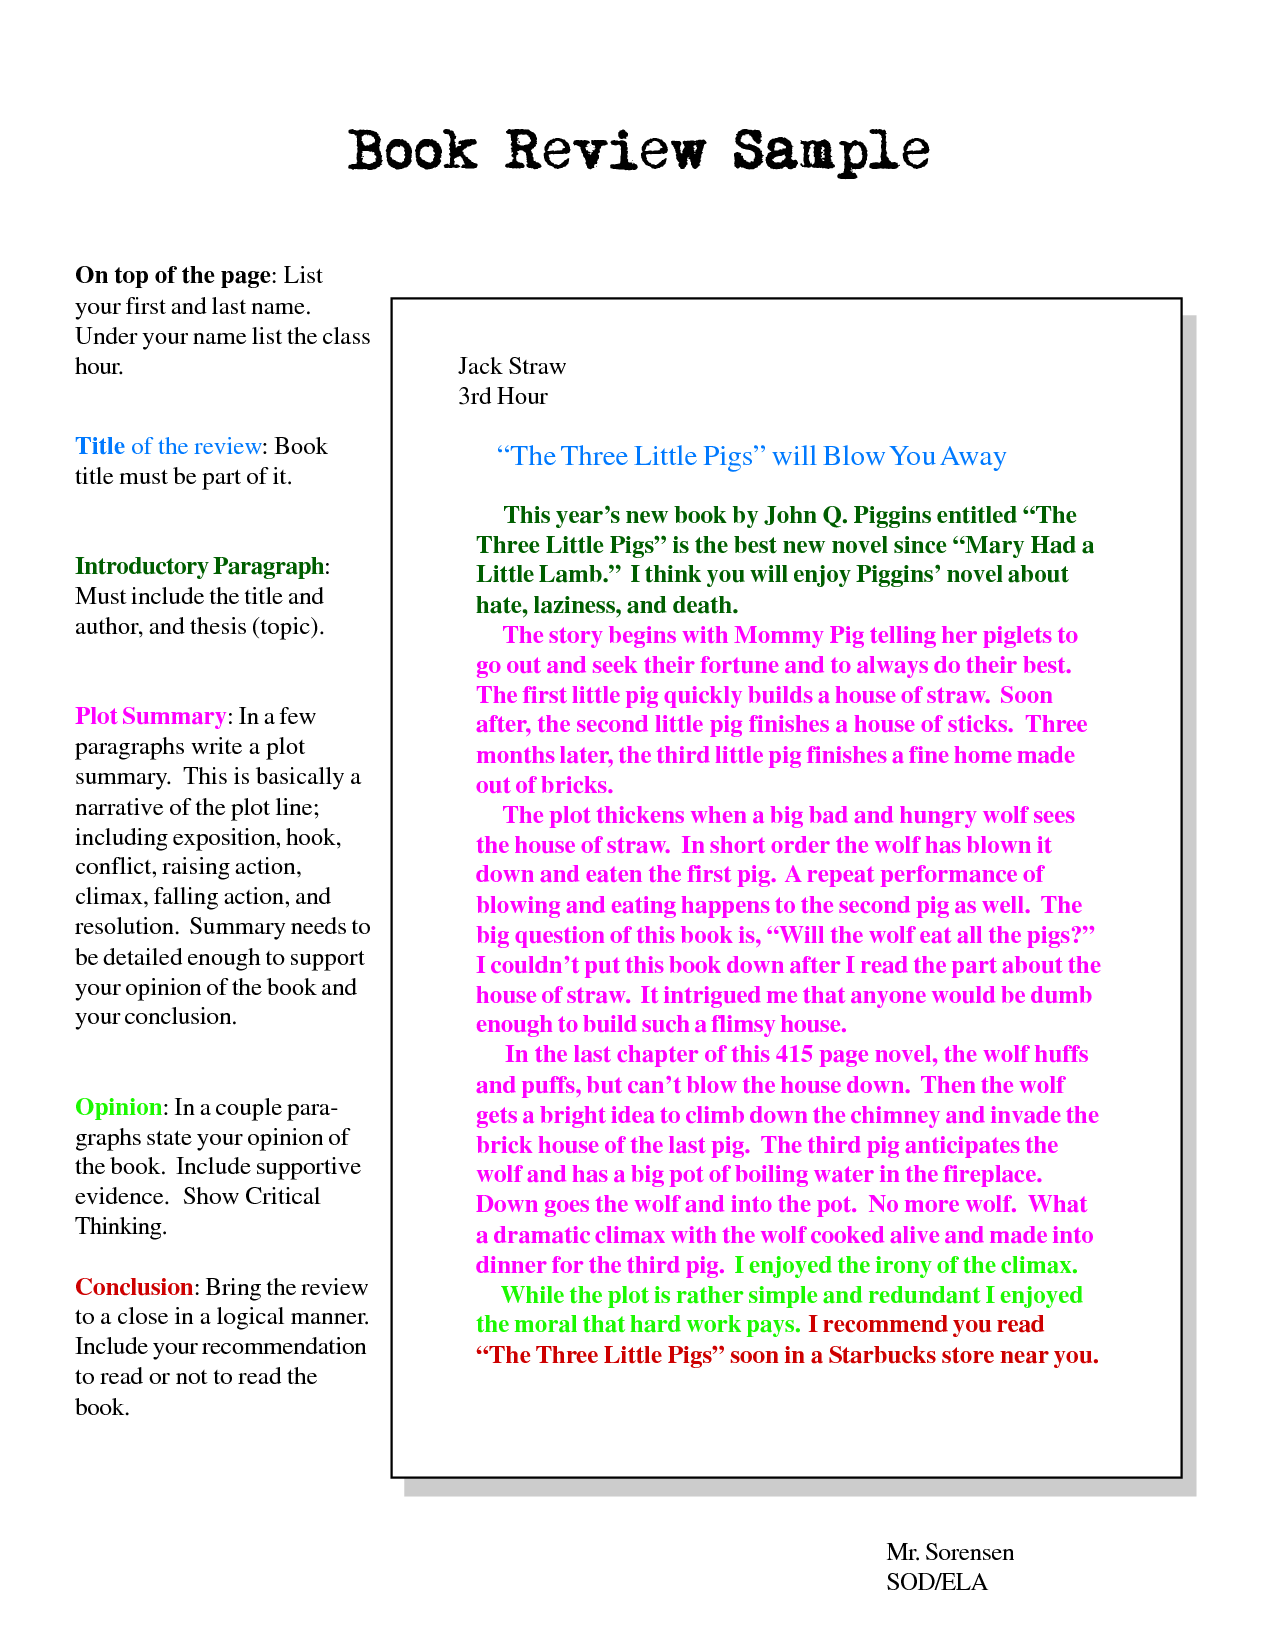 how to write a book review example pdf